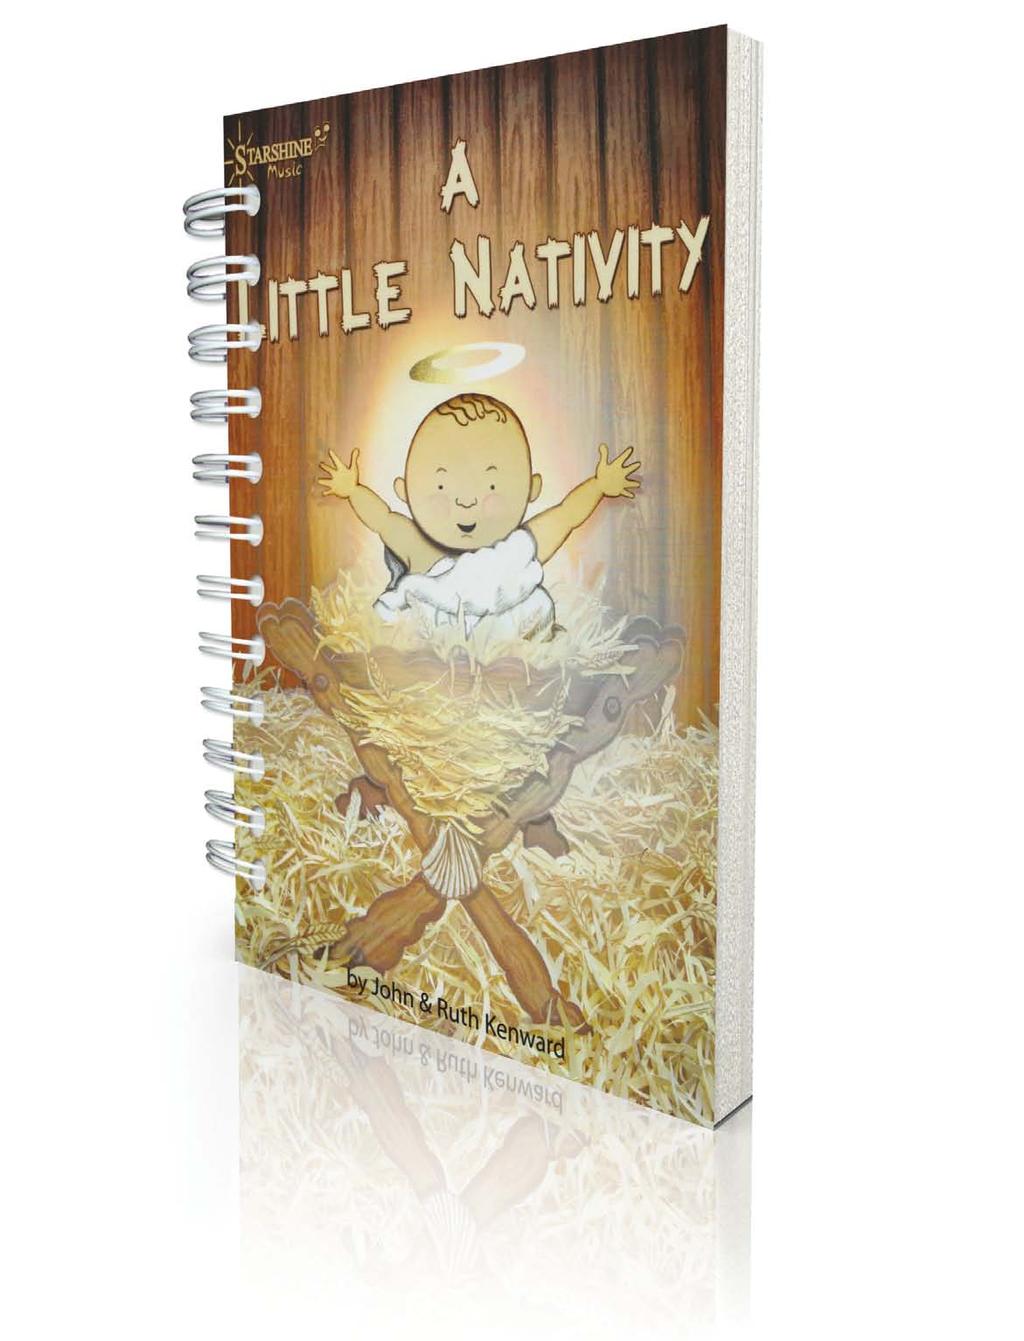 A Little Nativity John & Ruth Kenward Exceptionally easy to produce and very sweet, this is the perfect answer for those wanting to re-tell the Nativity story in a direct and simple way that even the